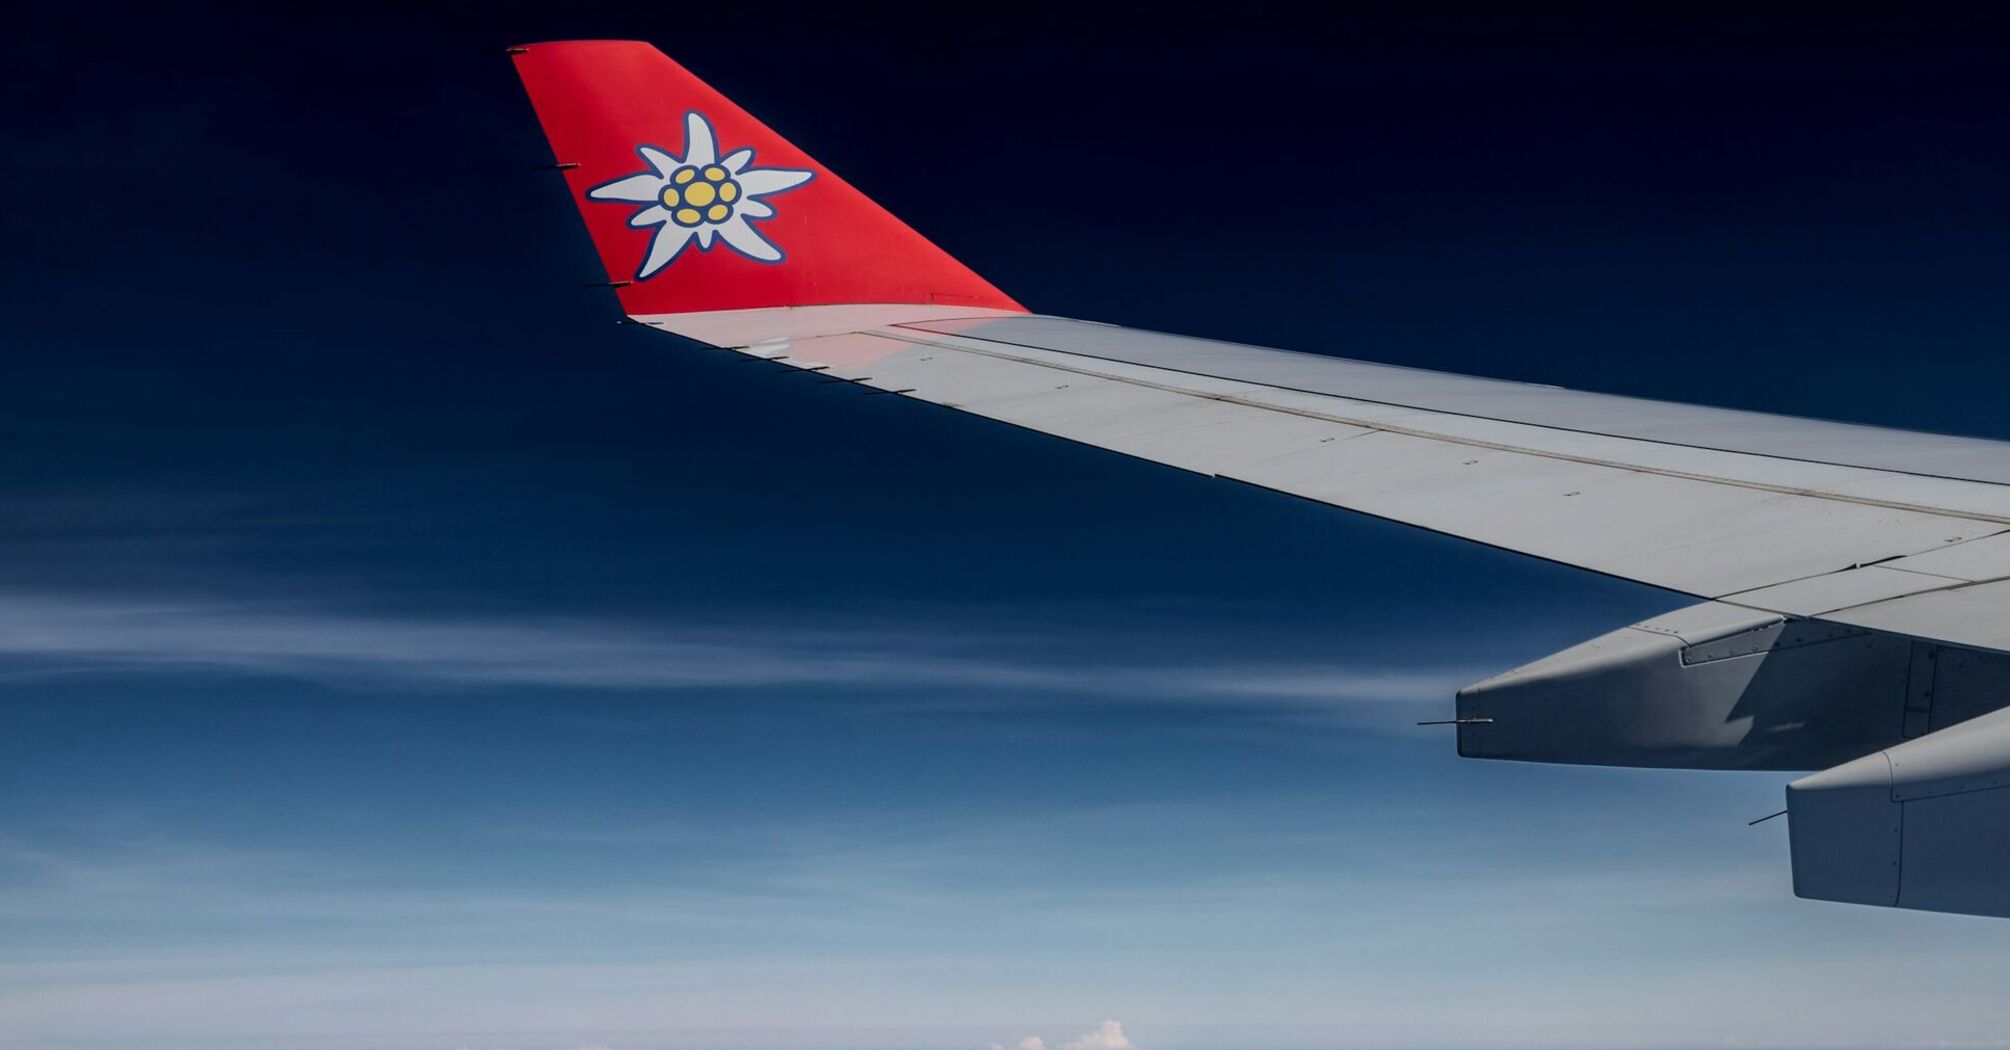 View of an airplane wing with a red winglet featuring a white Edelweiss flower against a clear blue sky